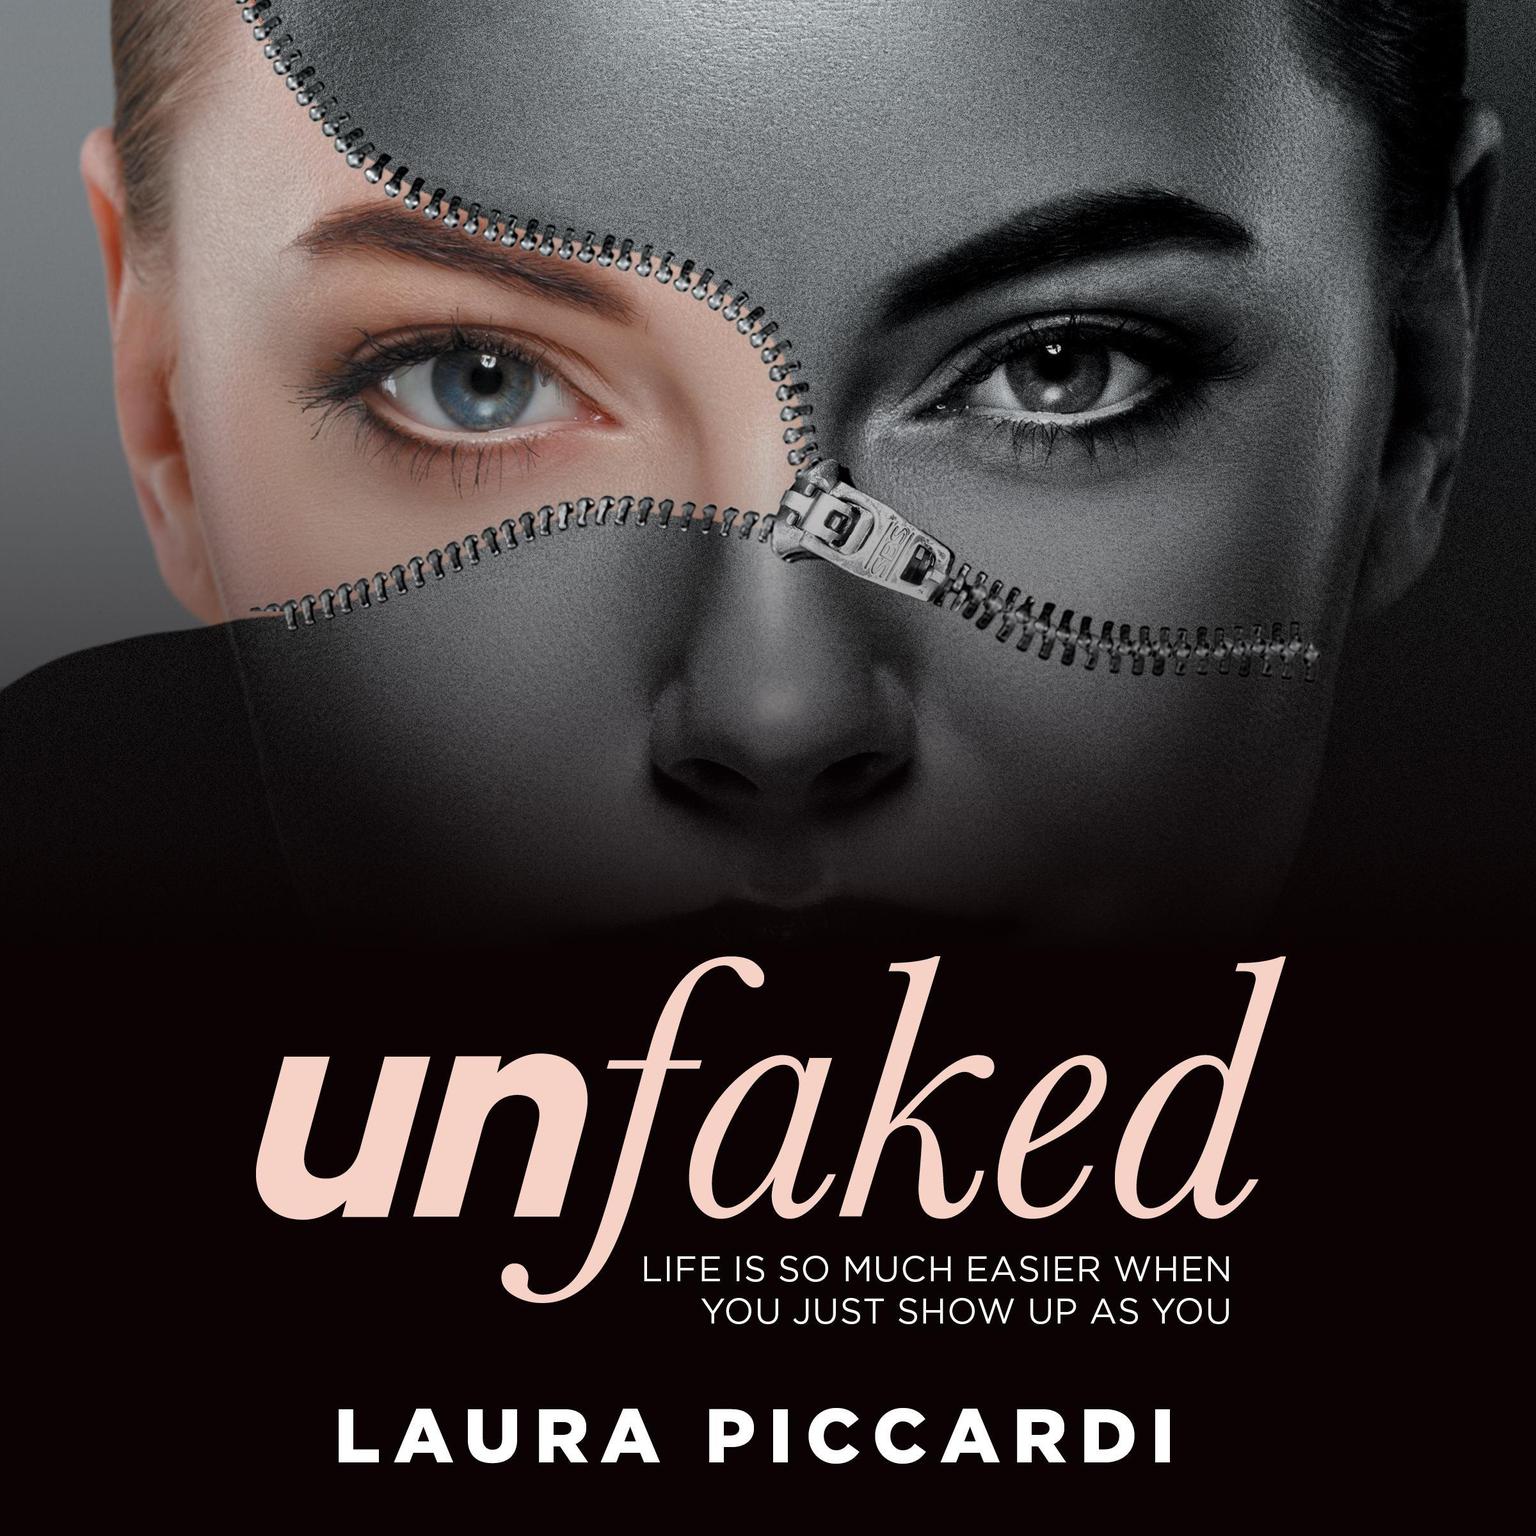 Unfaked: Life is so much easier when you just show up as you Audiobook, by Laura Piccardi